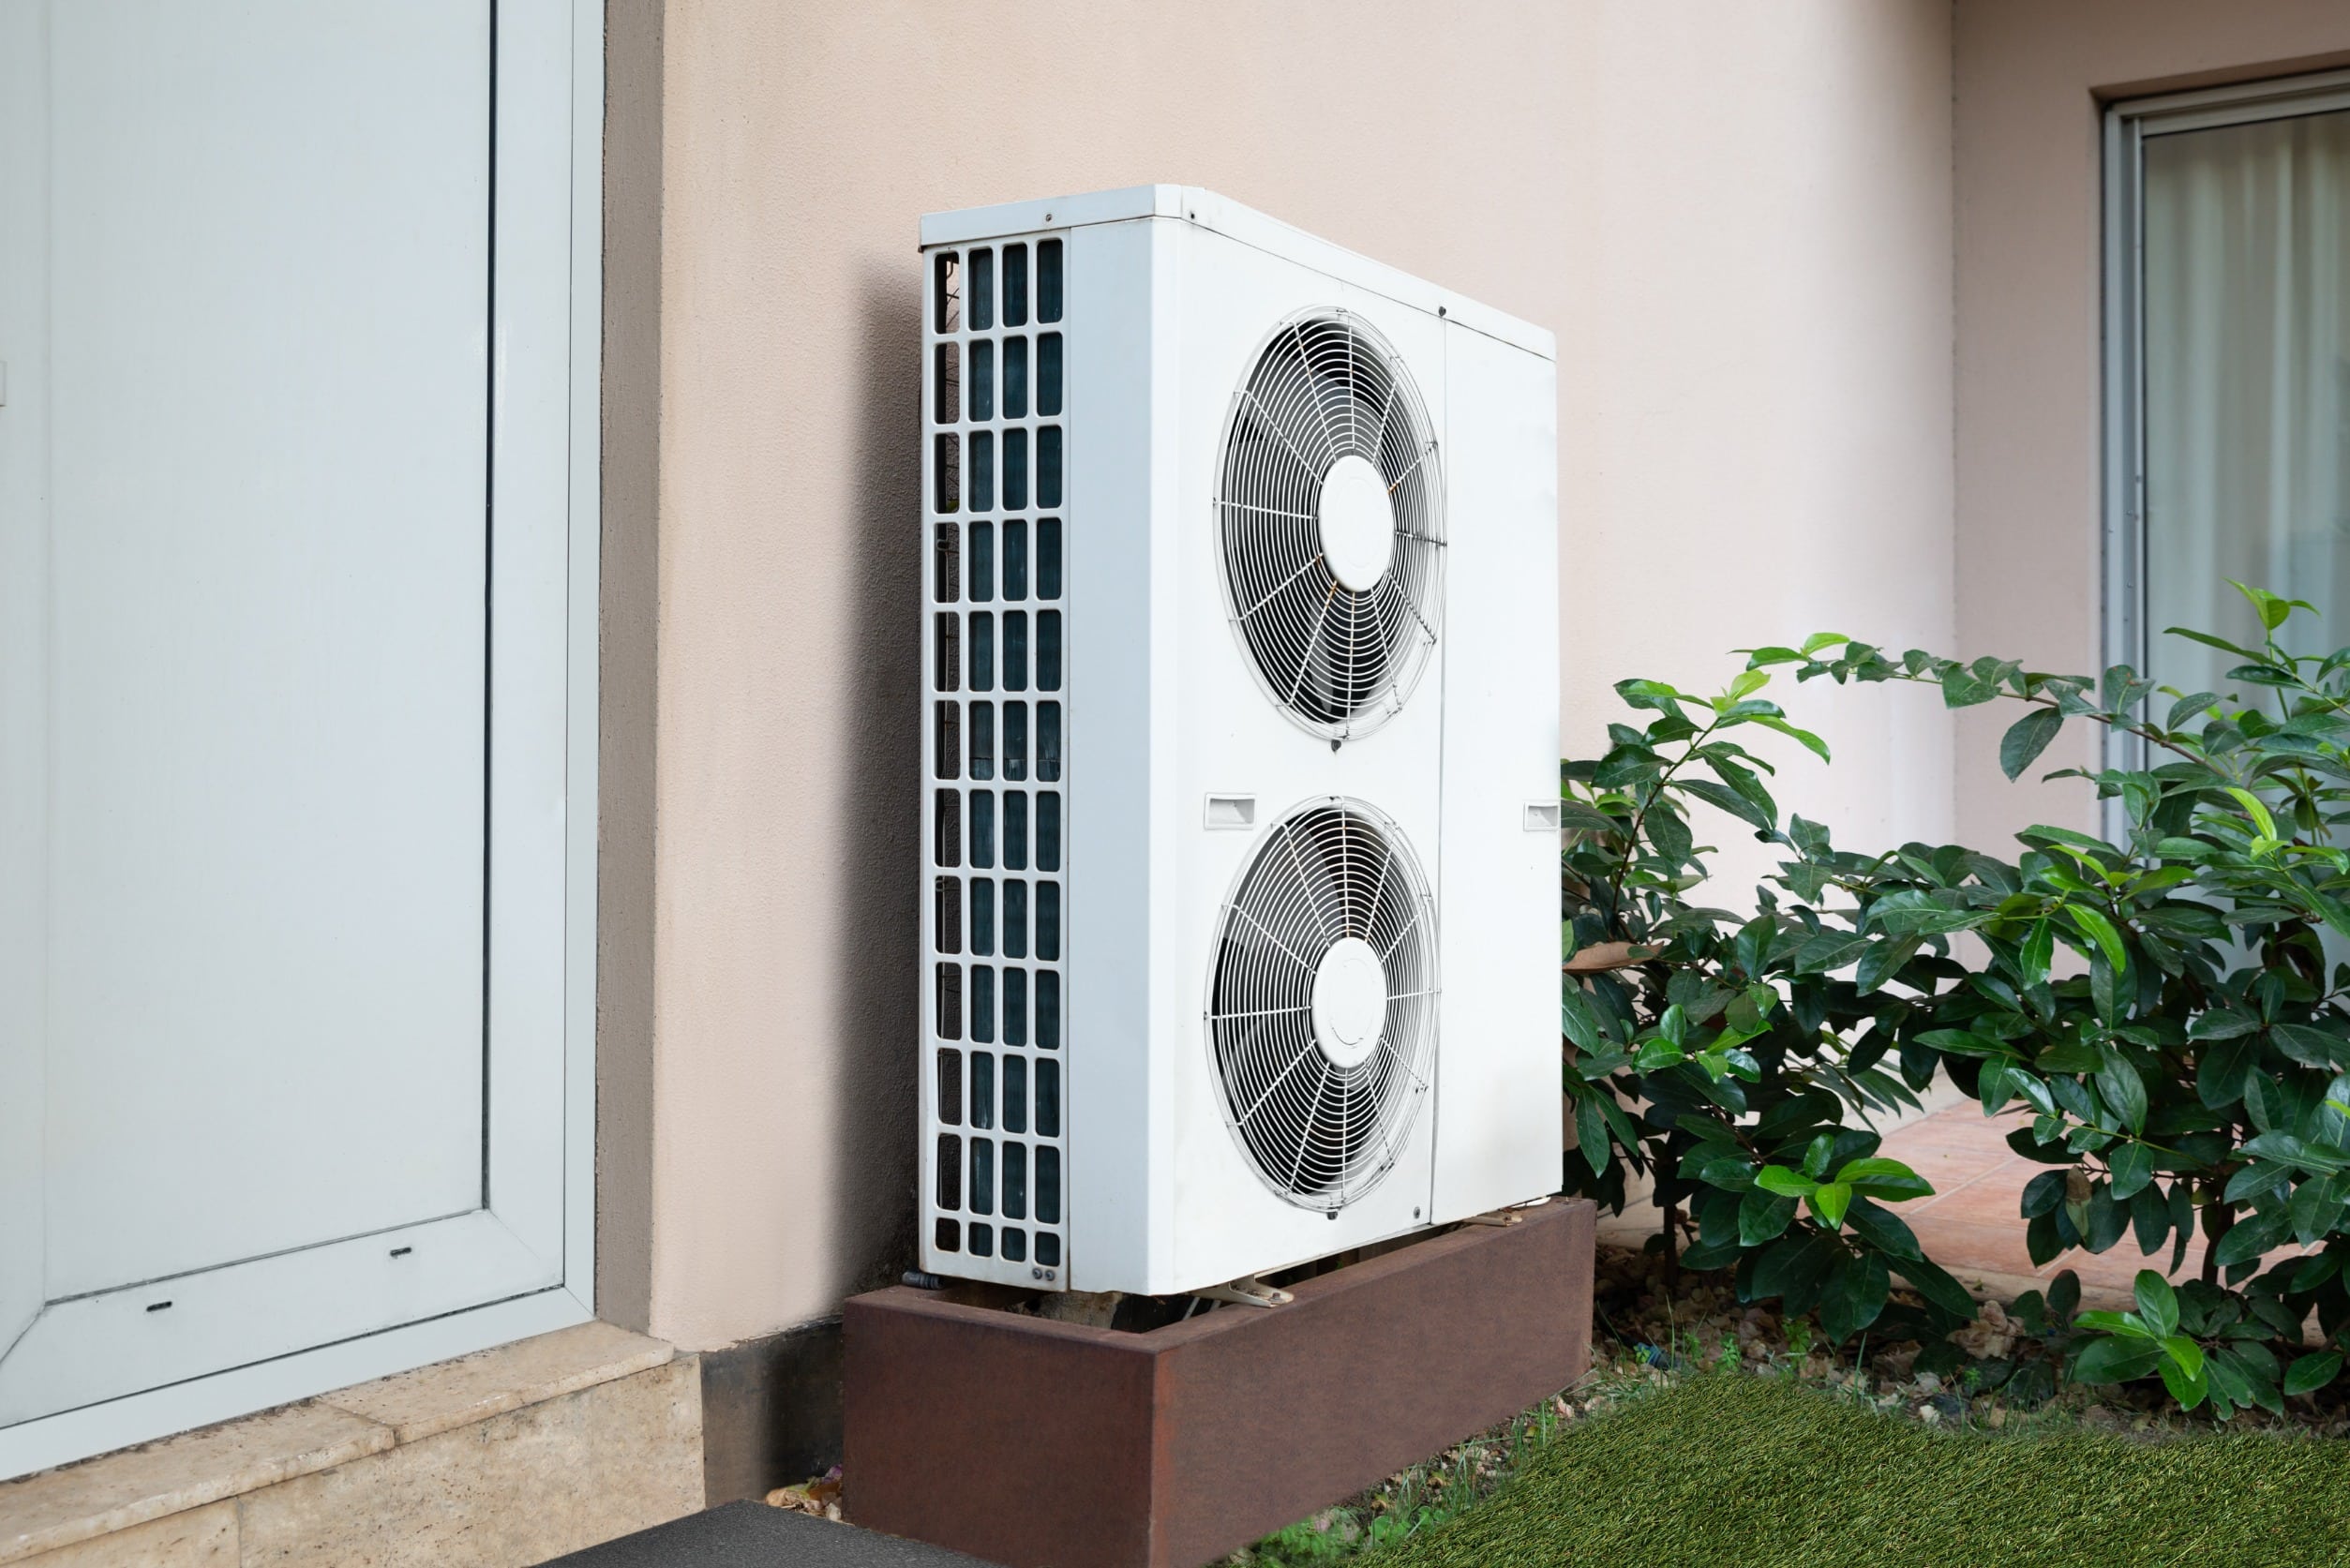 an outdoor air conditioning unit installed on a platform against the wall of a home